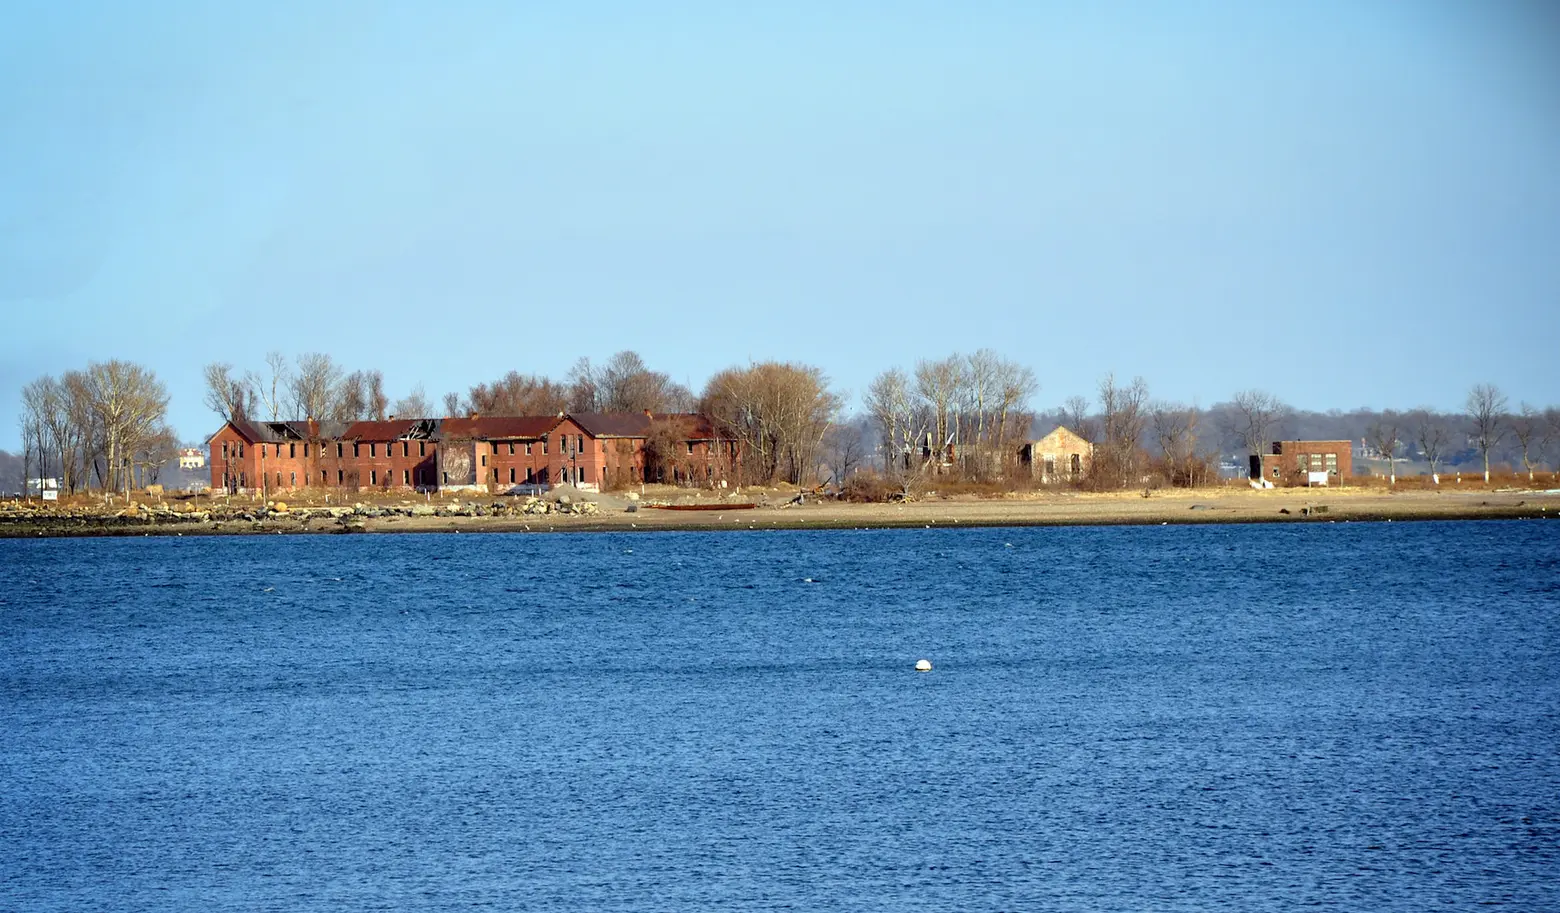 NYC might get a COVID-19 memorial on Hart Island